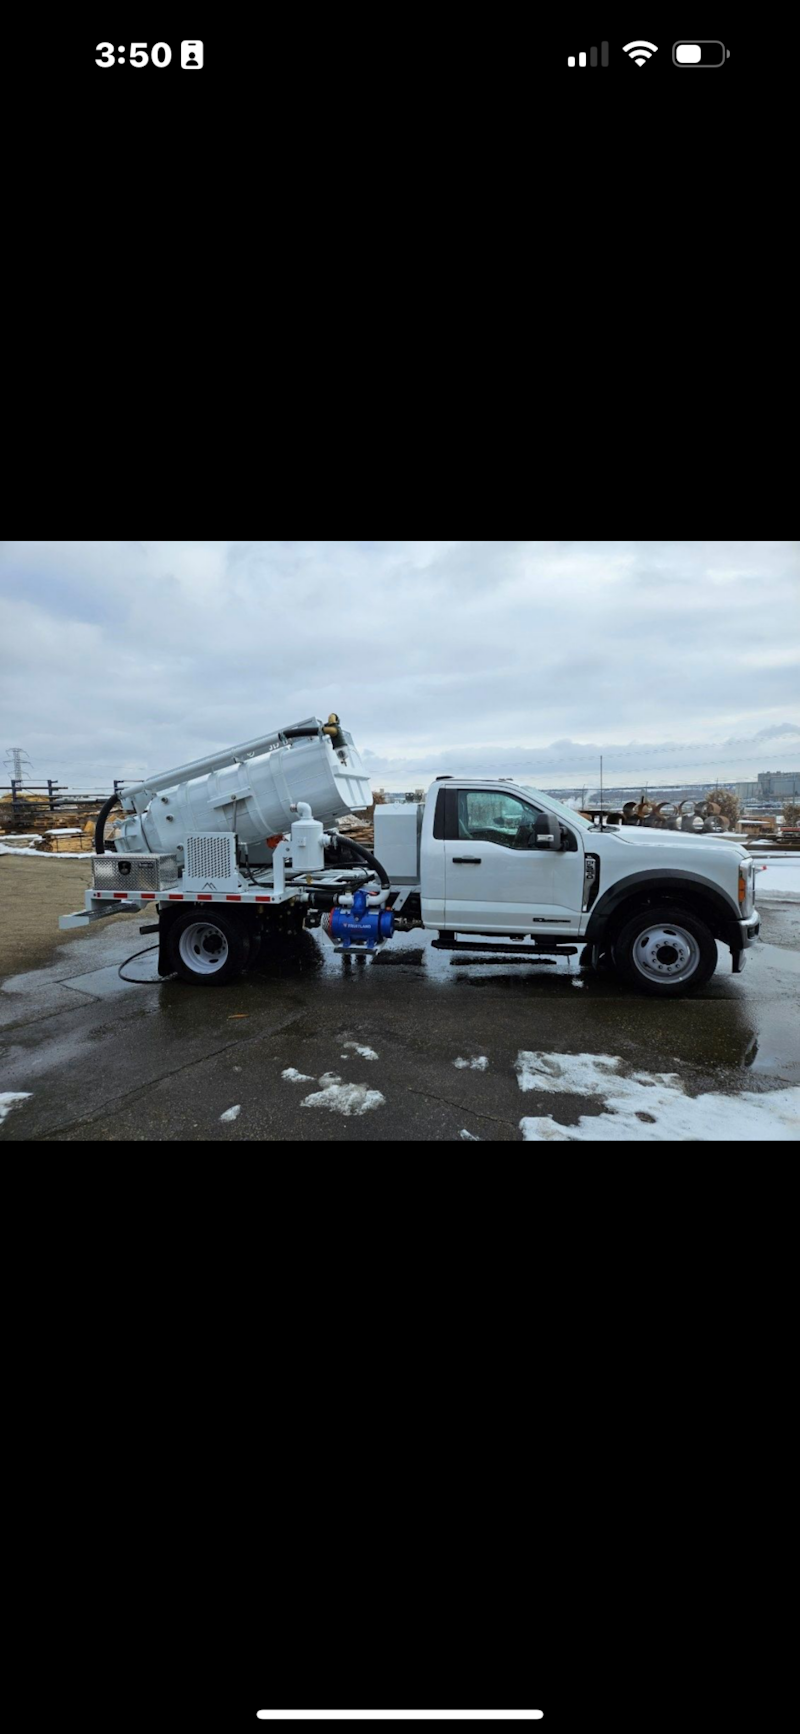 2008 Ford F550 diesel automatic 2wd Cusco low profile vac truck